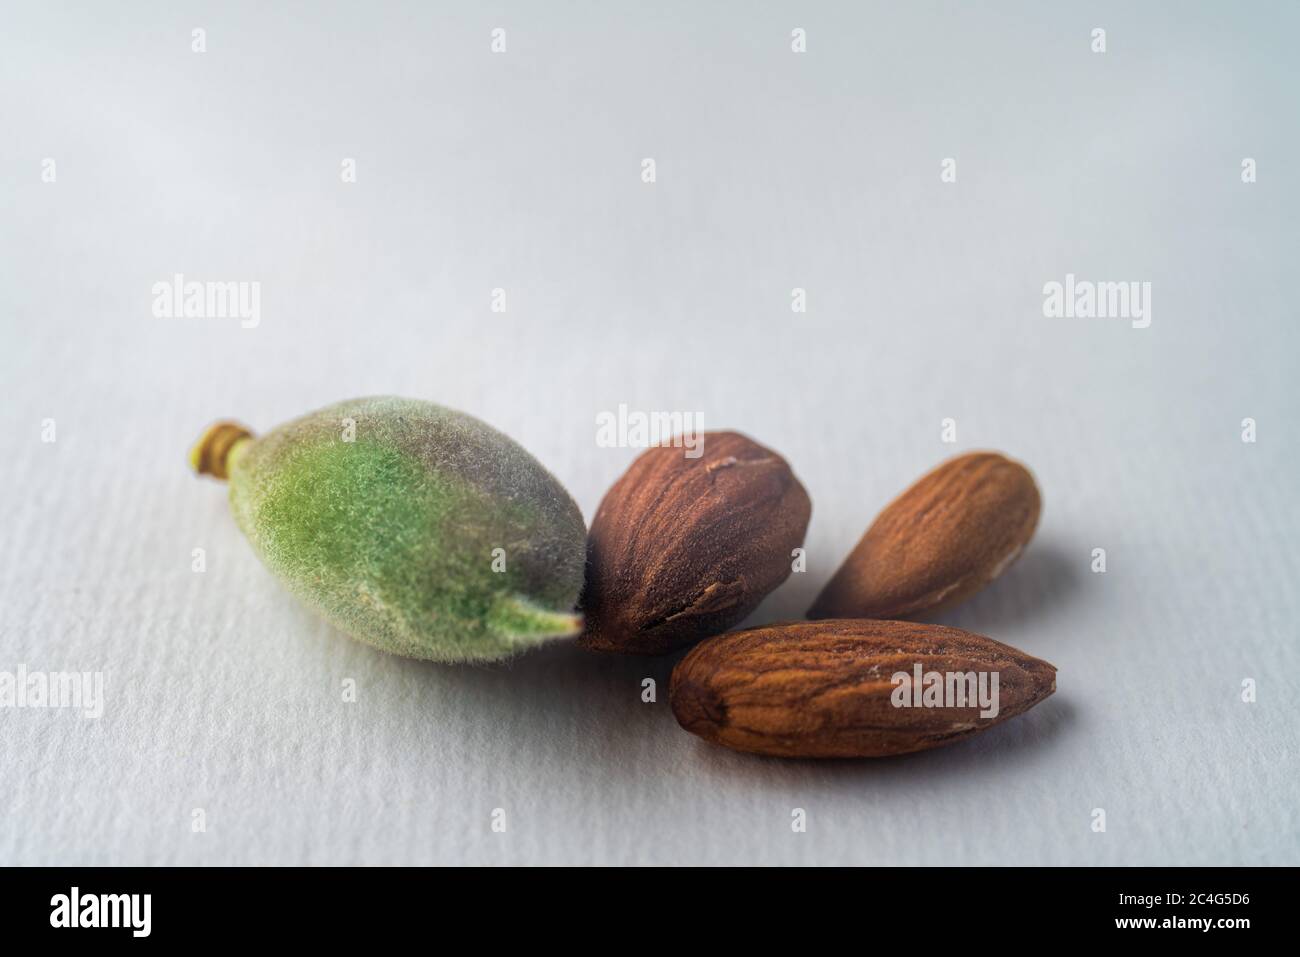 green and old riped almonds nut on spring, isolated on white textured paper. Copy space. Balanced diet vegan healthy lifestyle concept. Creative food Stock Photo